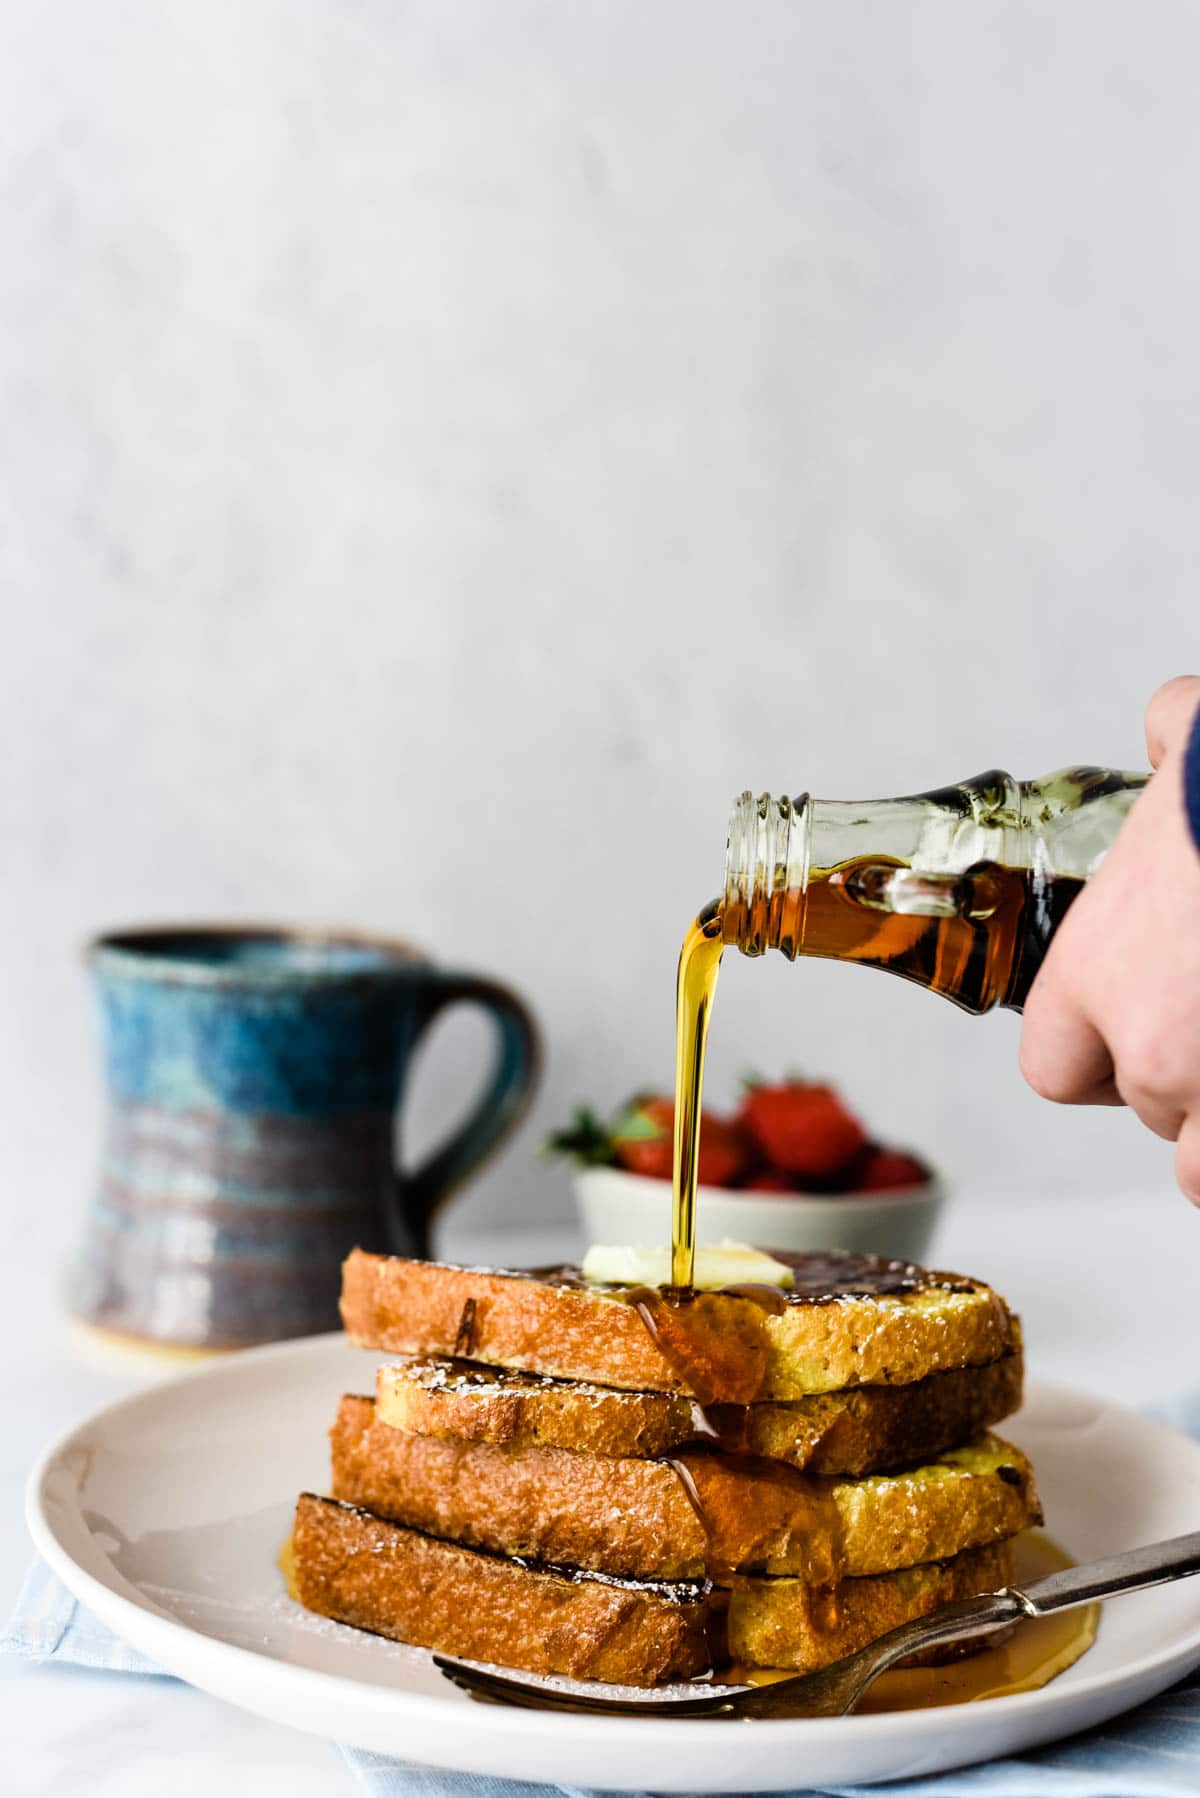 maple syrup being poured on stack of french toast